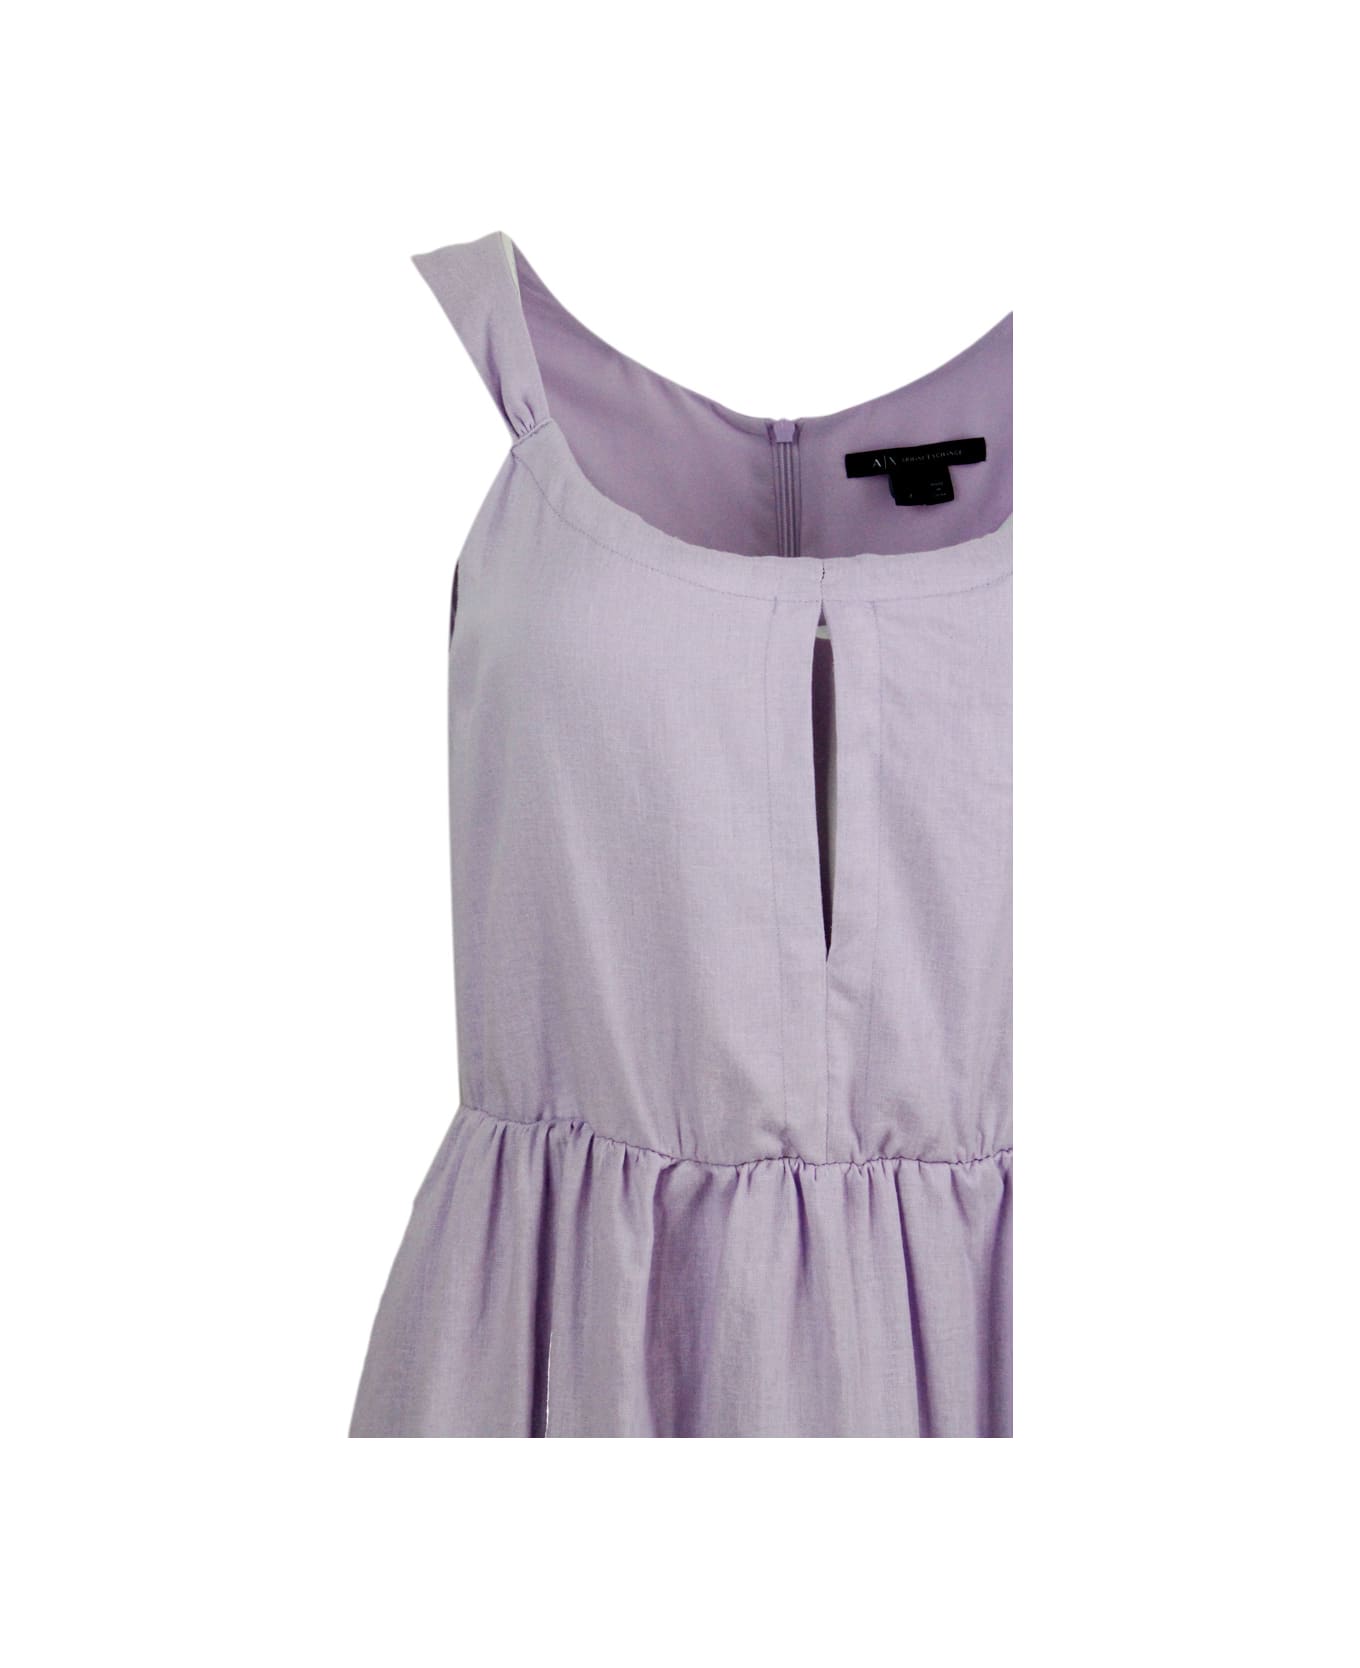 Armani Collezioni Sleeveless Dress Made Of Linen Blend With Elastic Gathering At The Waist. Welt Pockets - Pink ワンピース＆ドレス